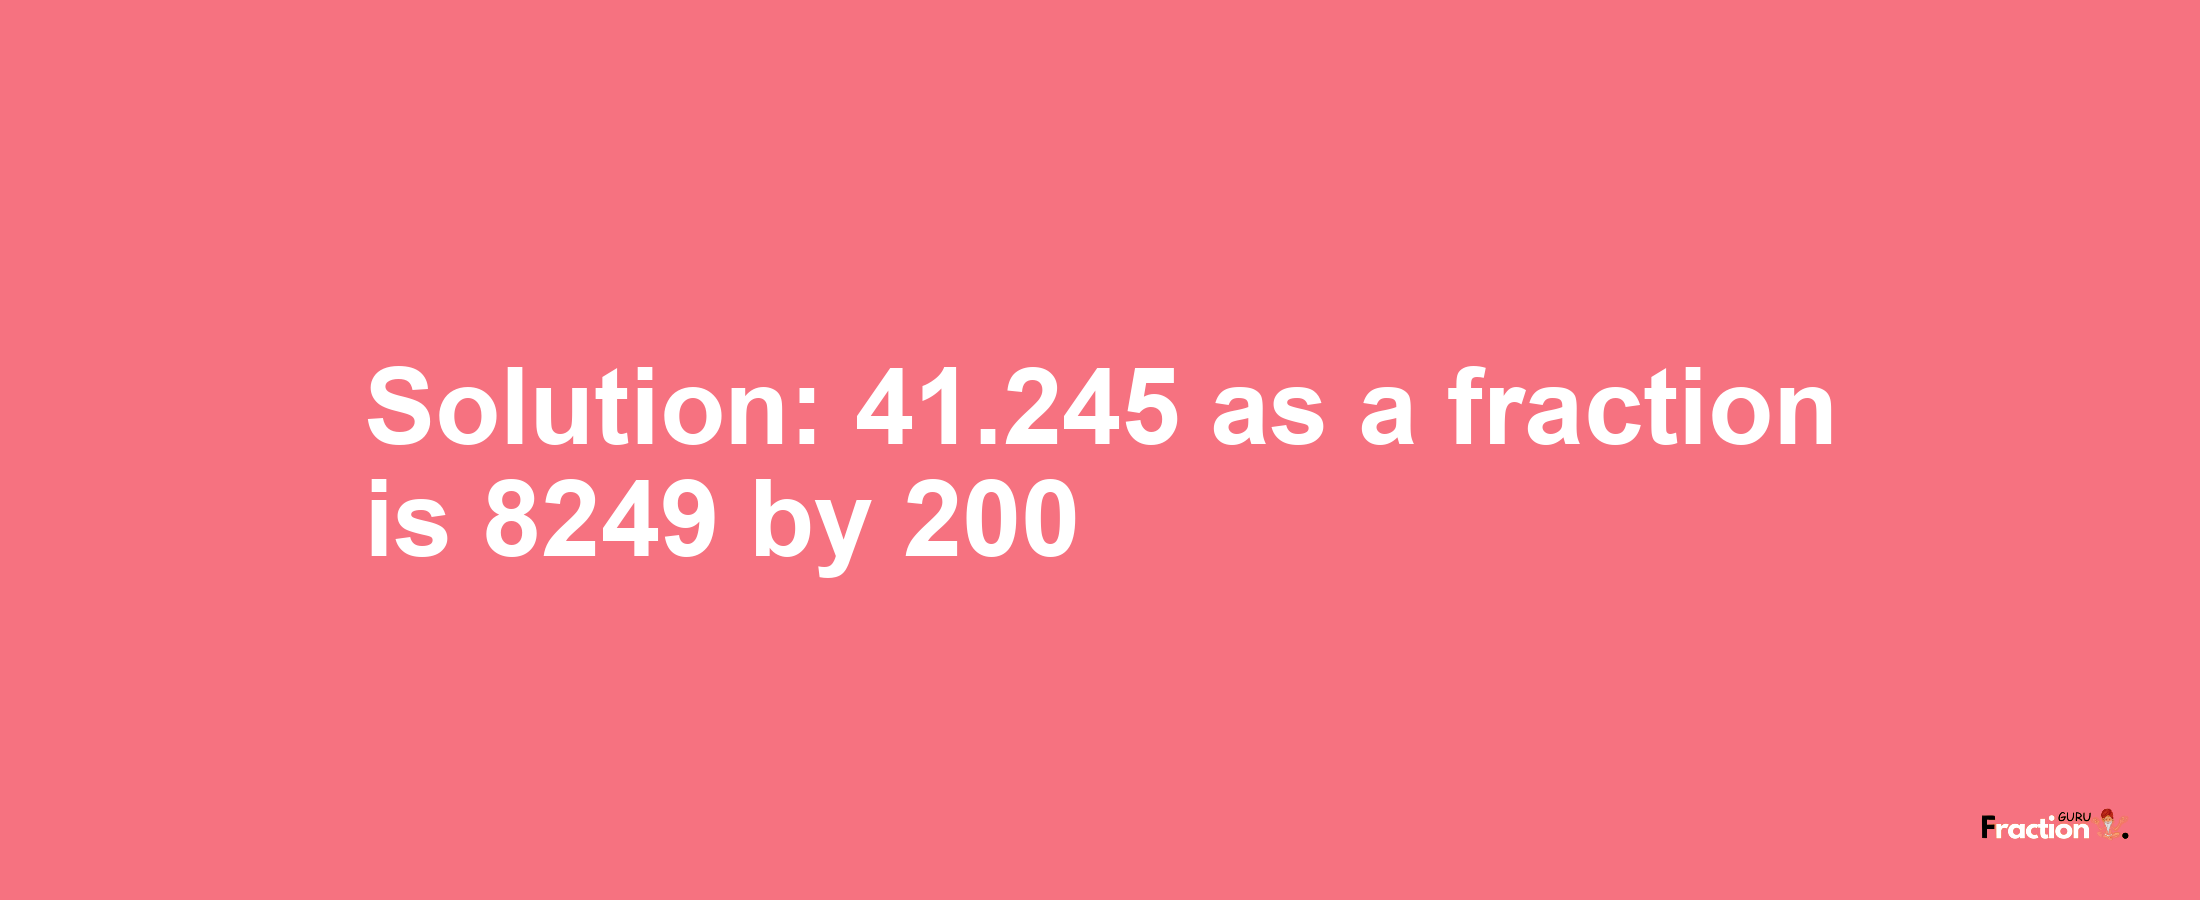 Solution:41.245 as a fraction is 8249/200